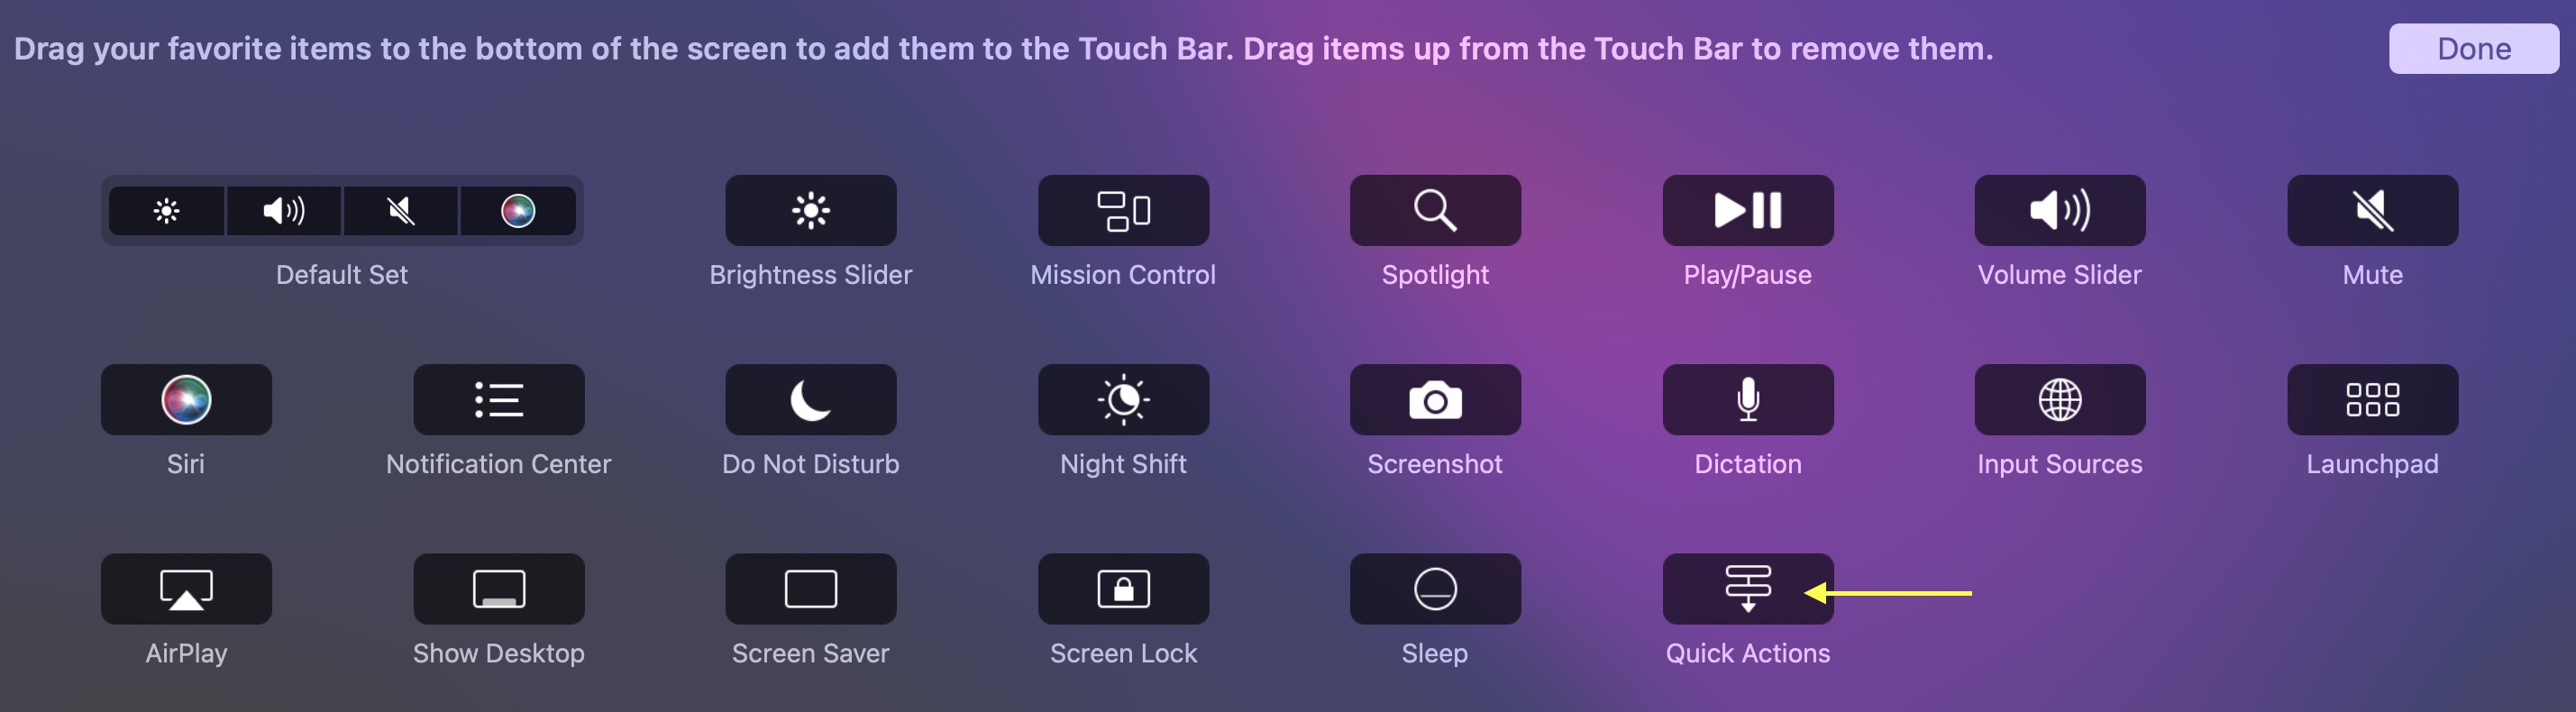 Adding Quick Actions to Touch Bar in OSX